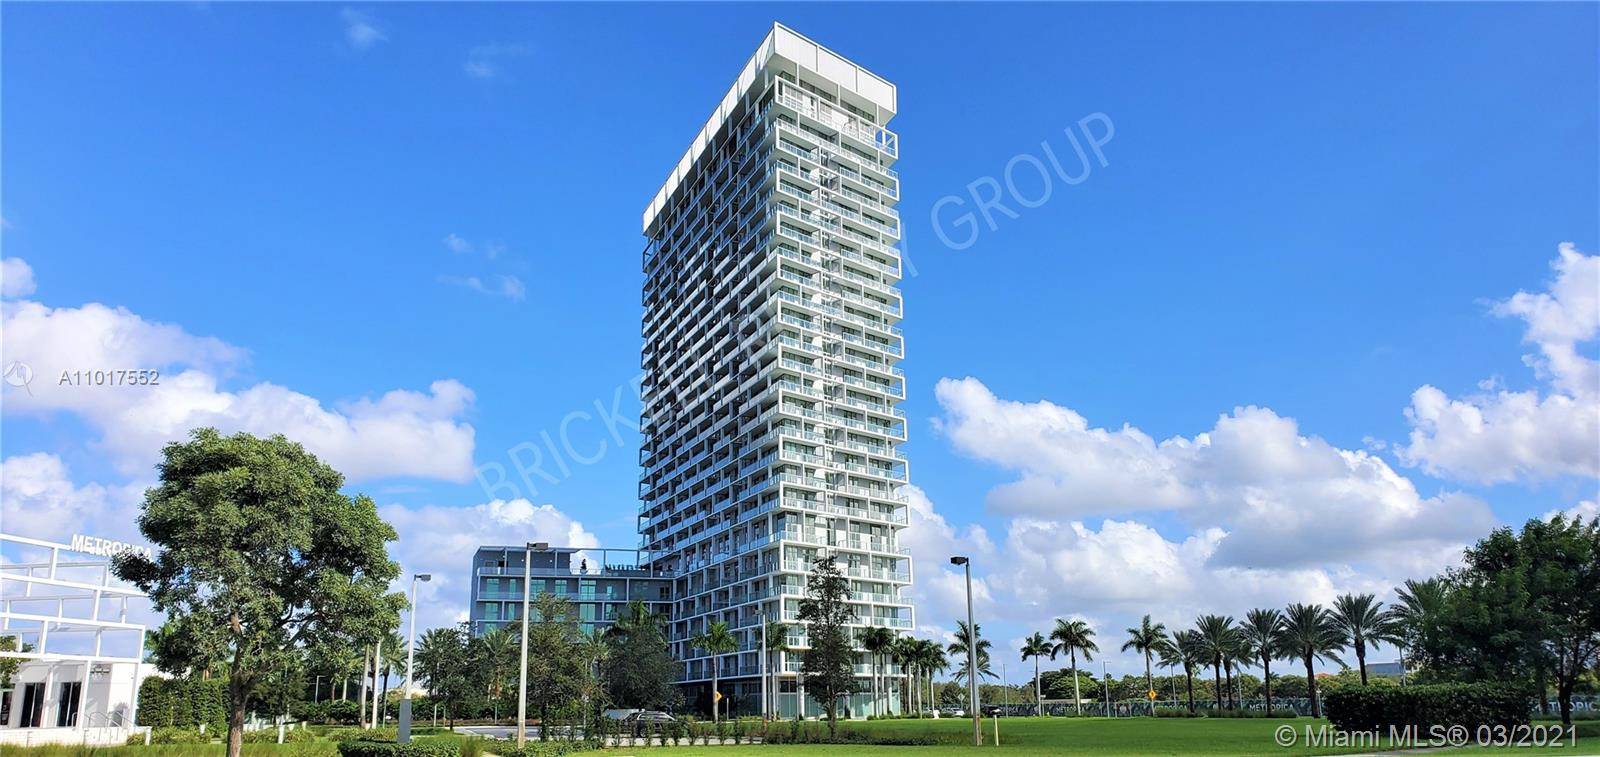 Metropica, brand new building, unit 2 bed 2 bath with shades and blackouts and Closet cabinets, ready to move in.